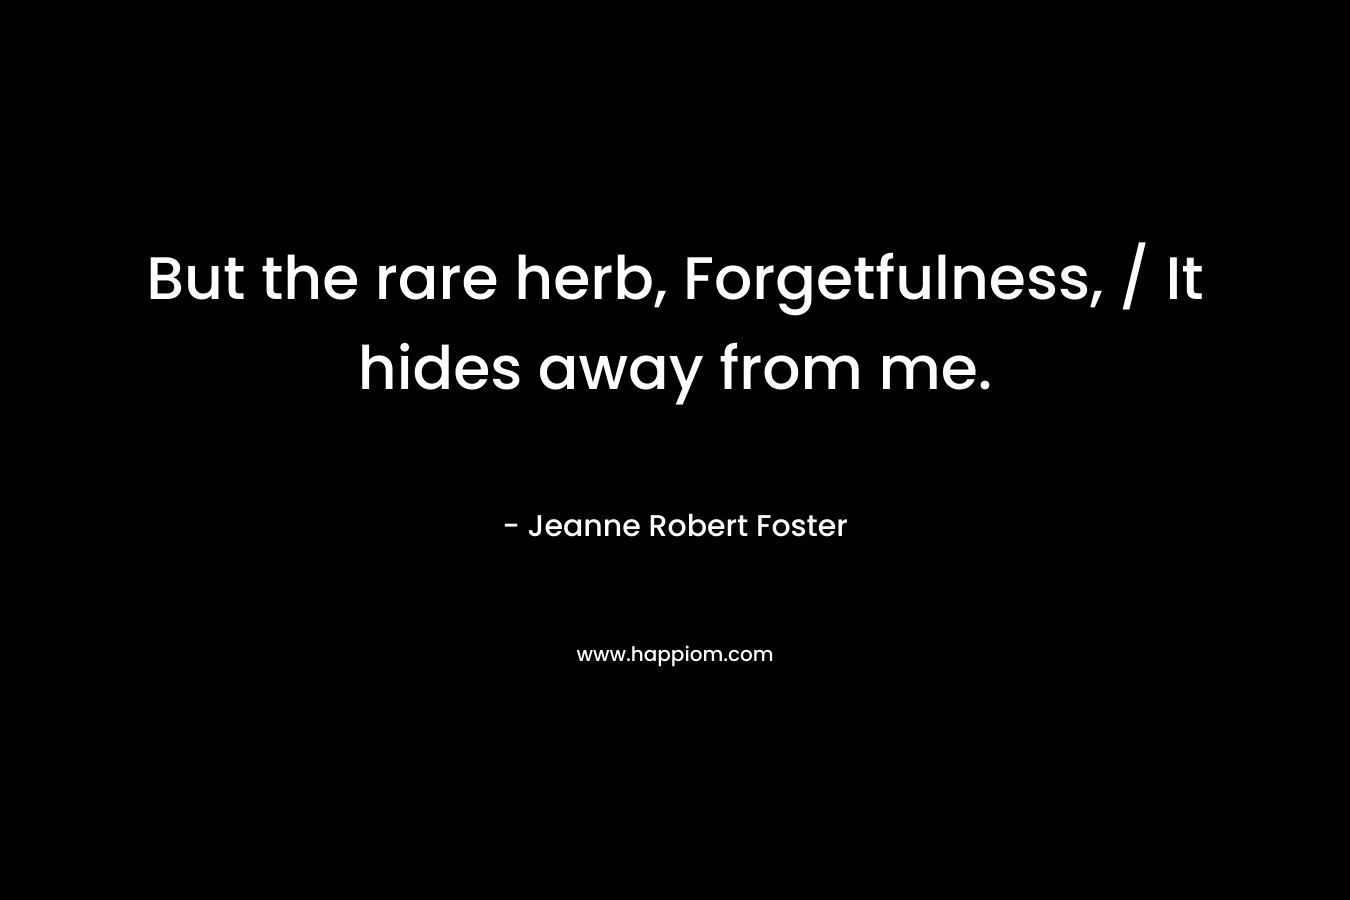 But the rare herb, Forgetfulness, / It hides away from me. – Jeanne Robert Foster